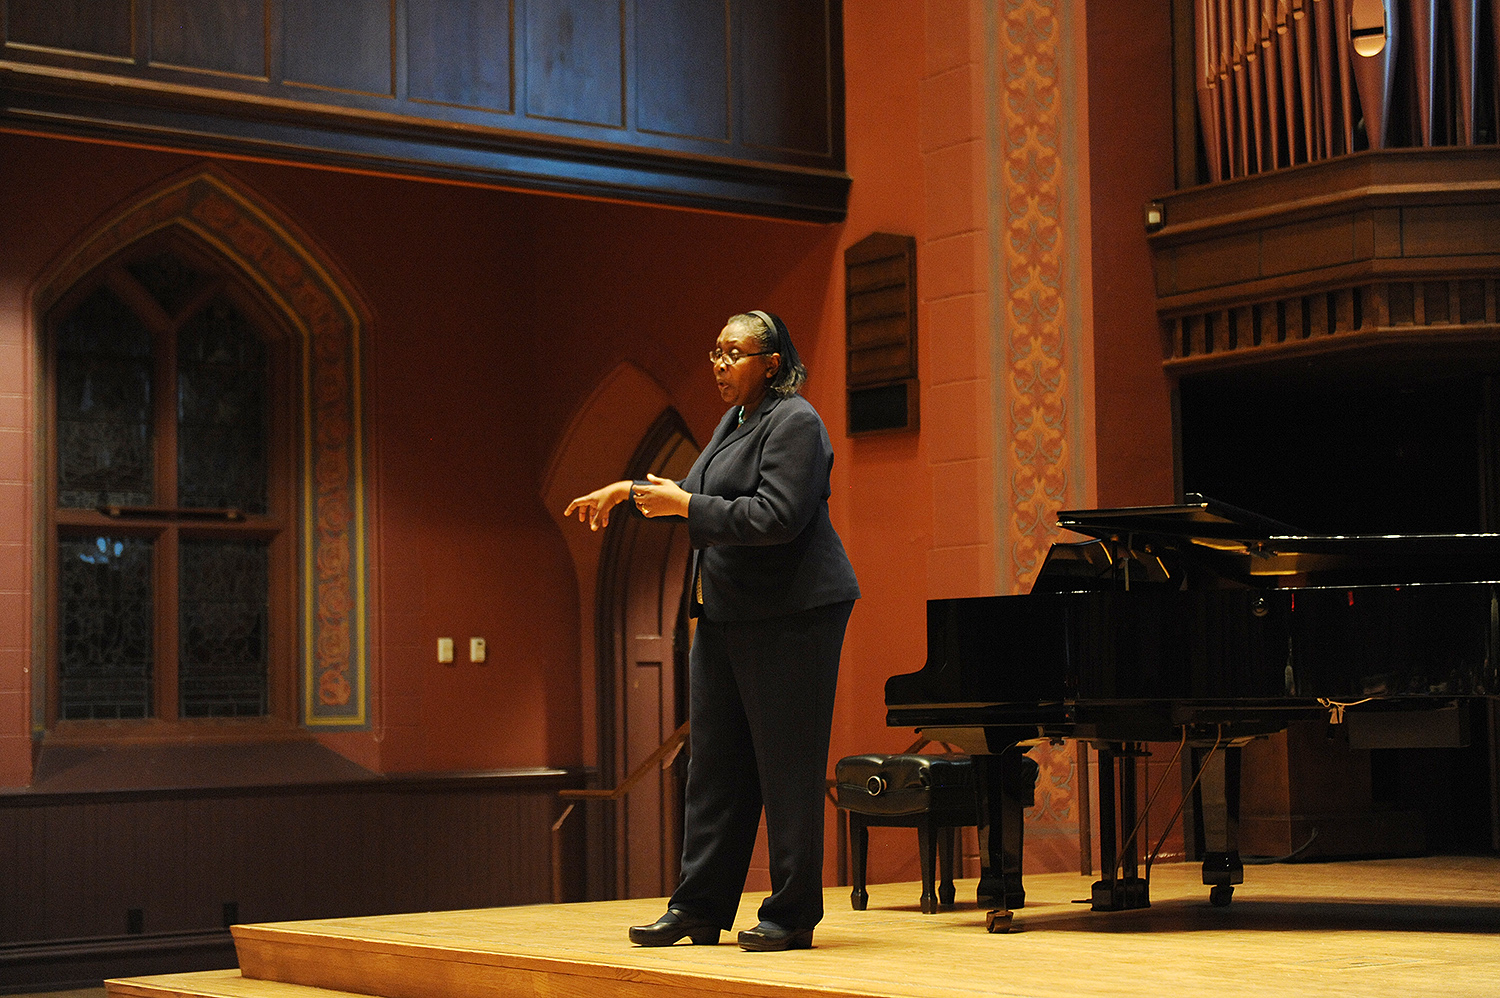 On Jan. 29, the campus community attended the annual commemoration of Rev. Dr. Martin Luther King Jr.’s legacy in Memorial Chapel. Dorceta E. Taylor, a leading voice in the environmental justice movement, delivered the keynote address, titled “Different Shades of Green or Beyond the Farm."